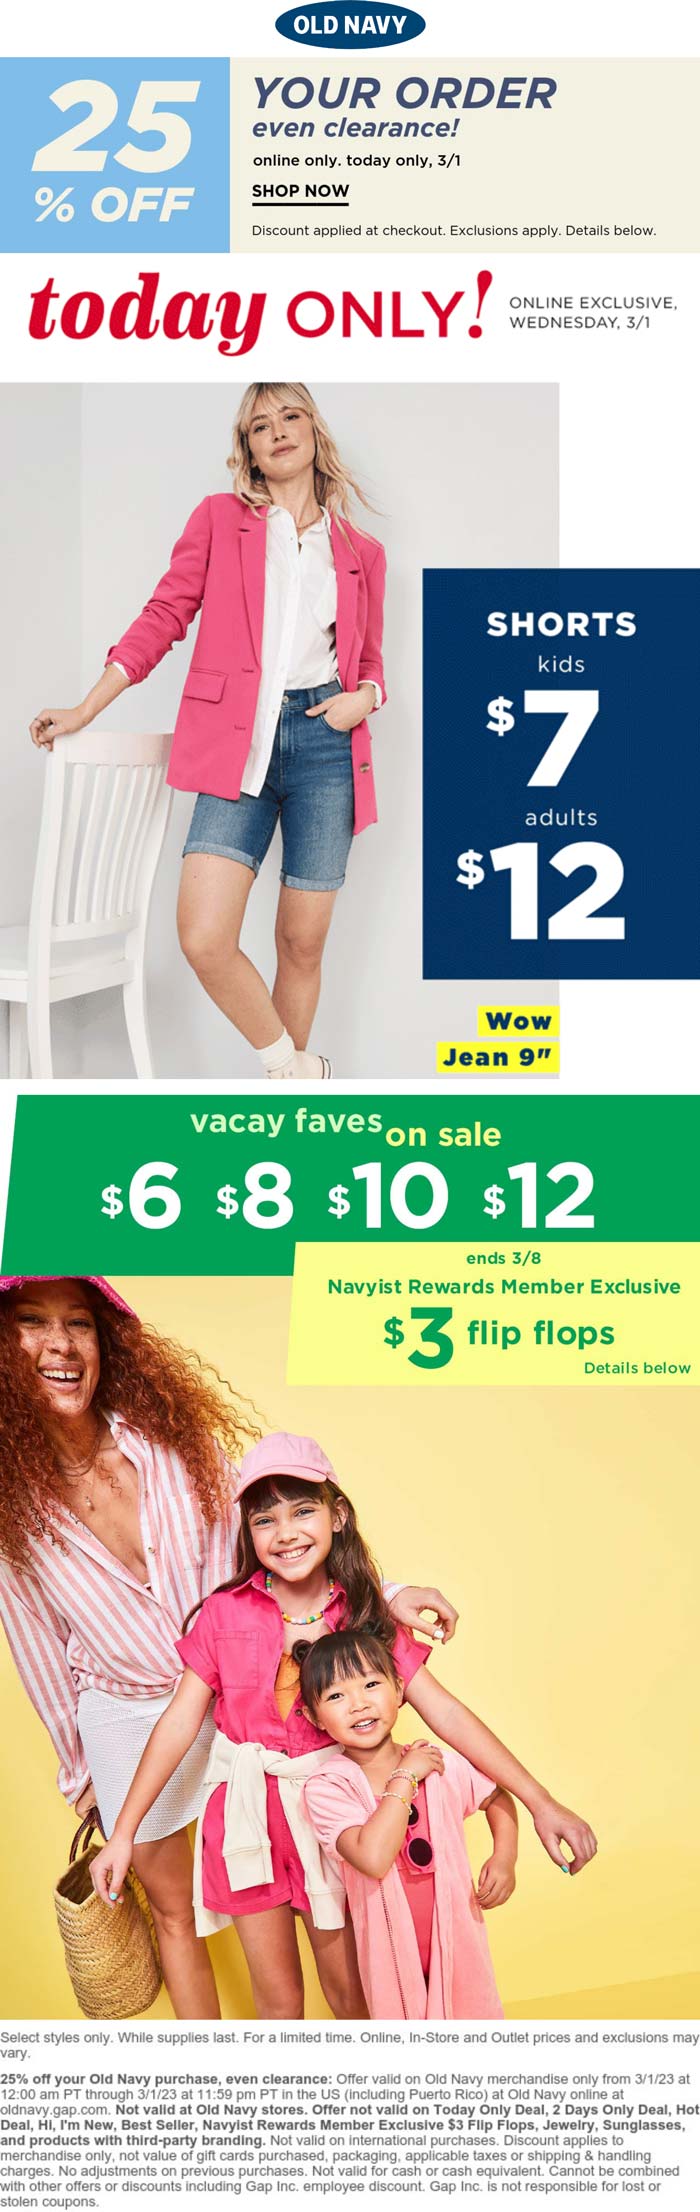 Old Navy stores Coupon  25% off today at Old Navy via promo code WHOA #oldnavy 